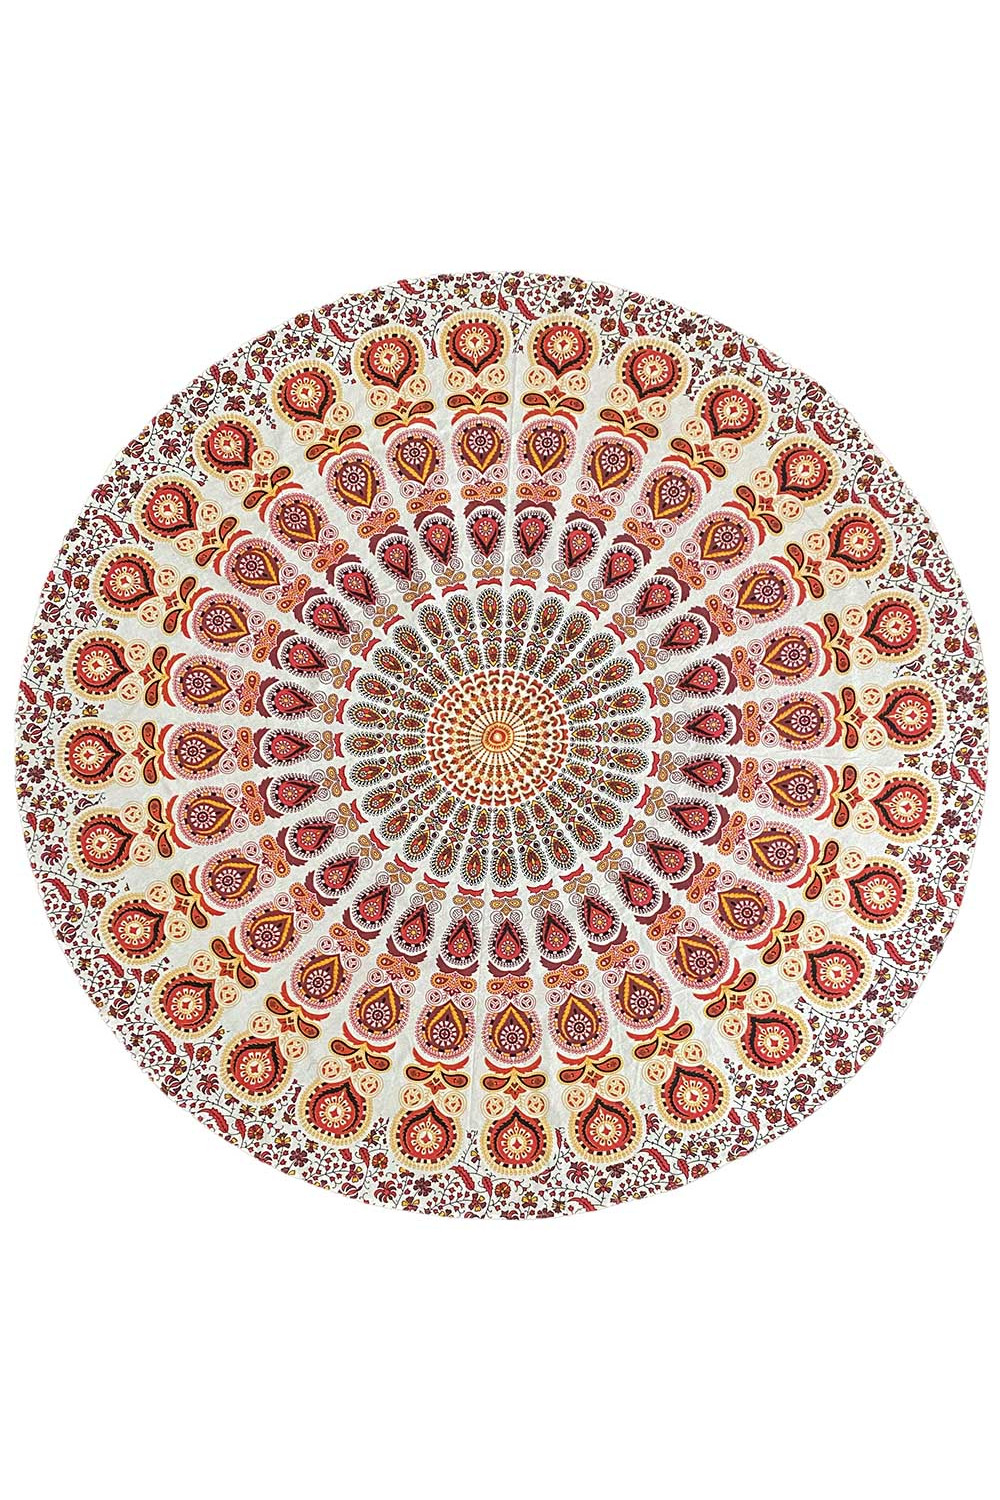 Zest For Life Round Red/Gold Mandala Tablecloth Tapestry 80" - Hemmed Edge 